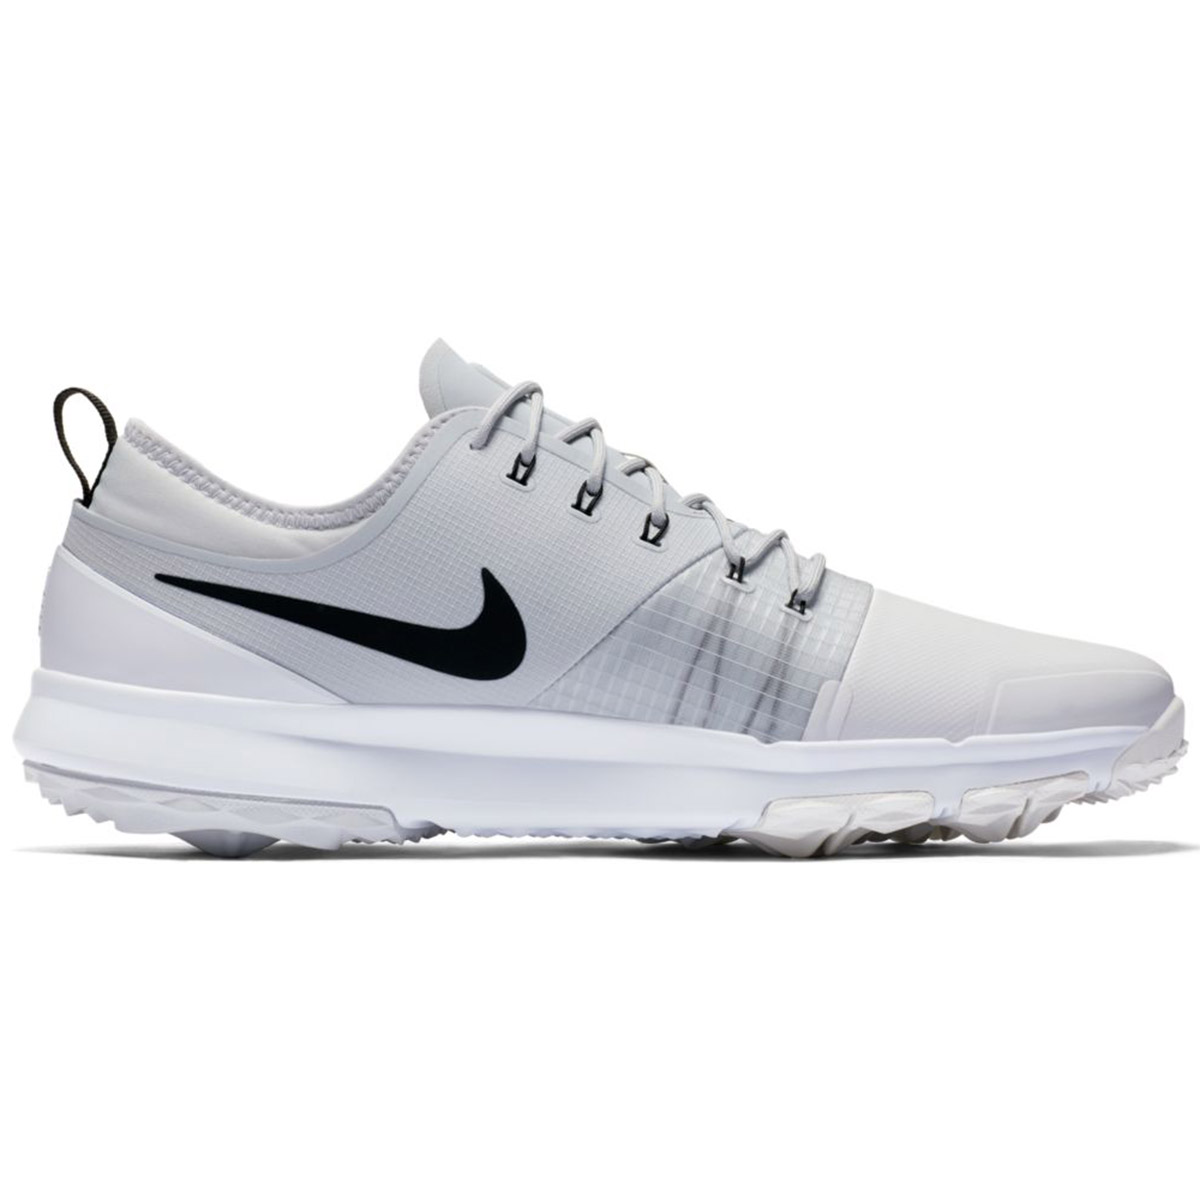 Nike Golf FI Impact 3 Shoes from american golf